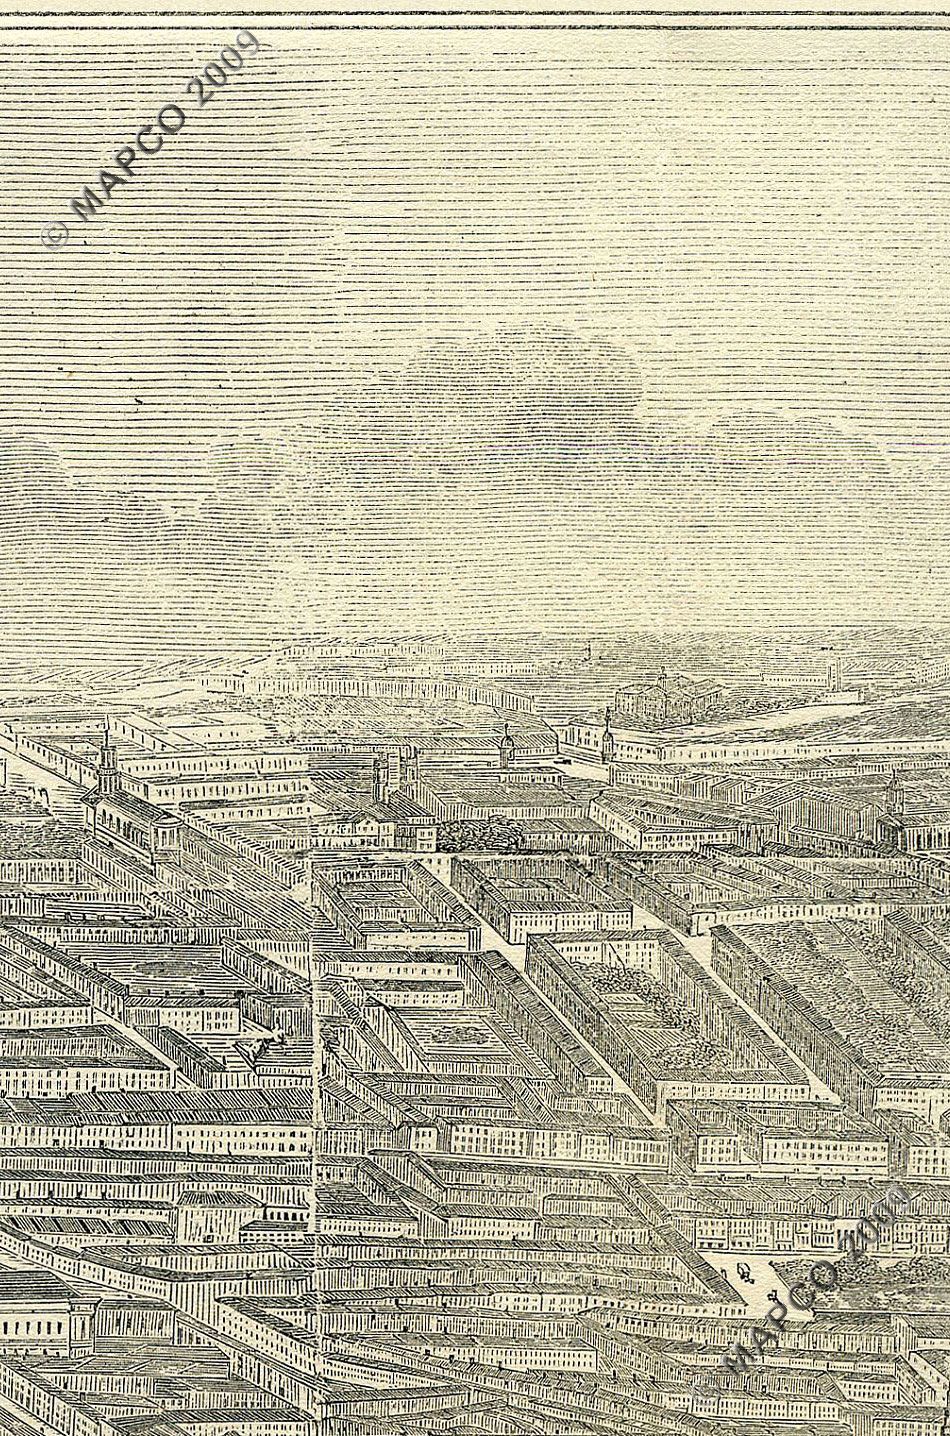 Panorama Of The River Thames In 1845